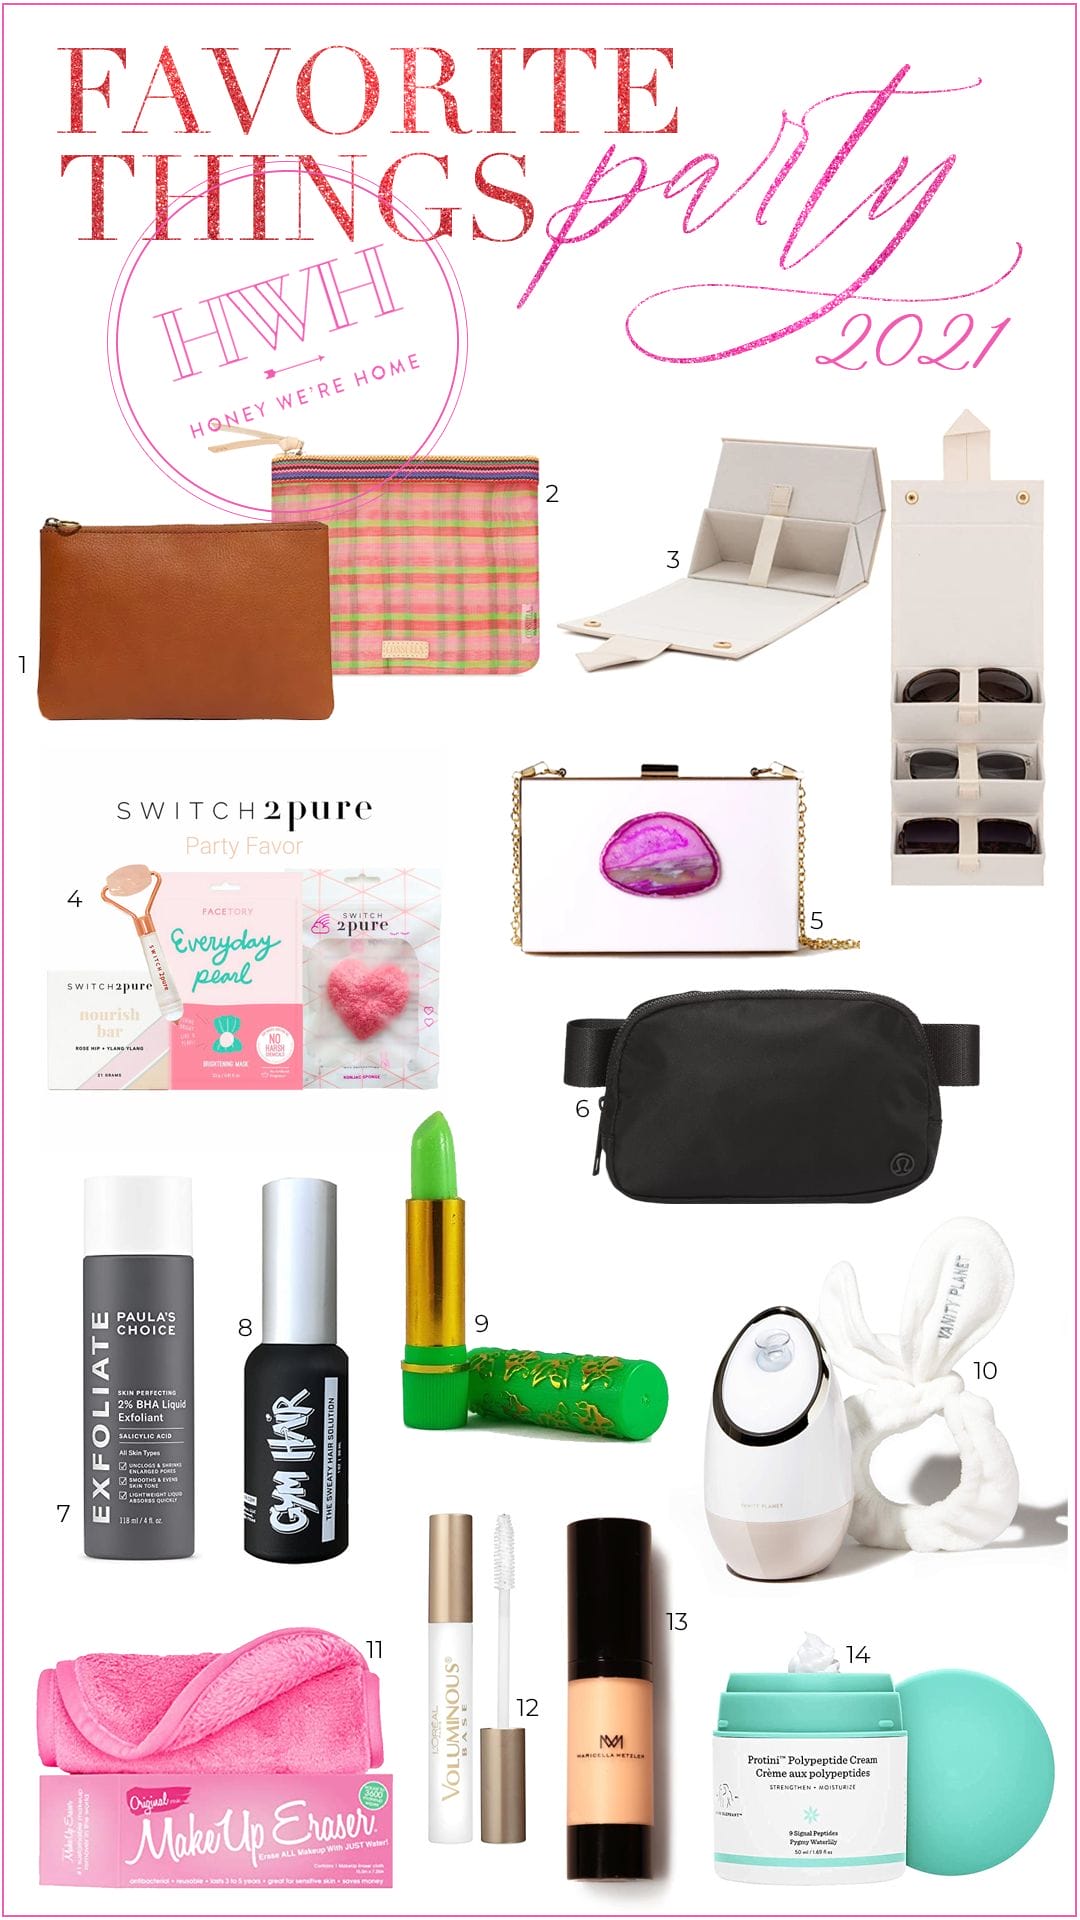 Favorite Things Party Gift Ideas — West Coast Capri